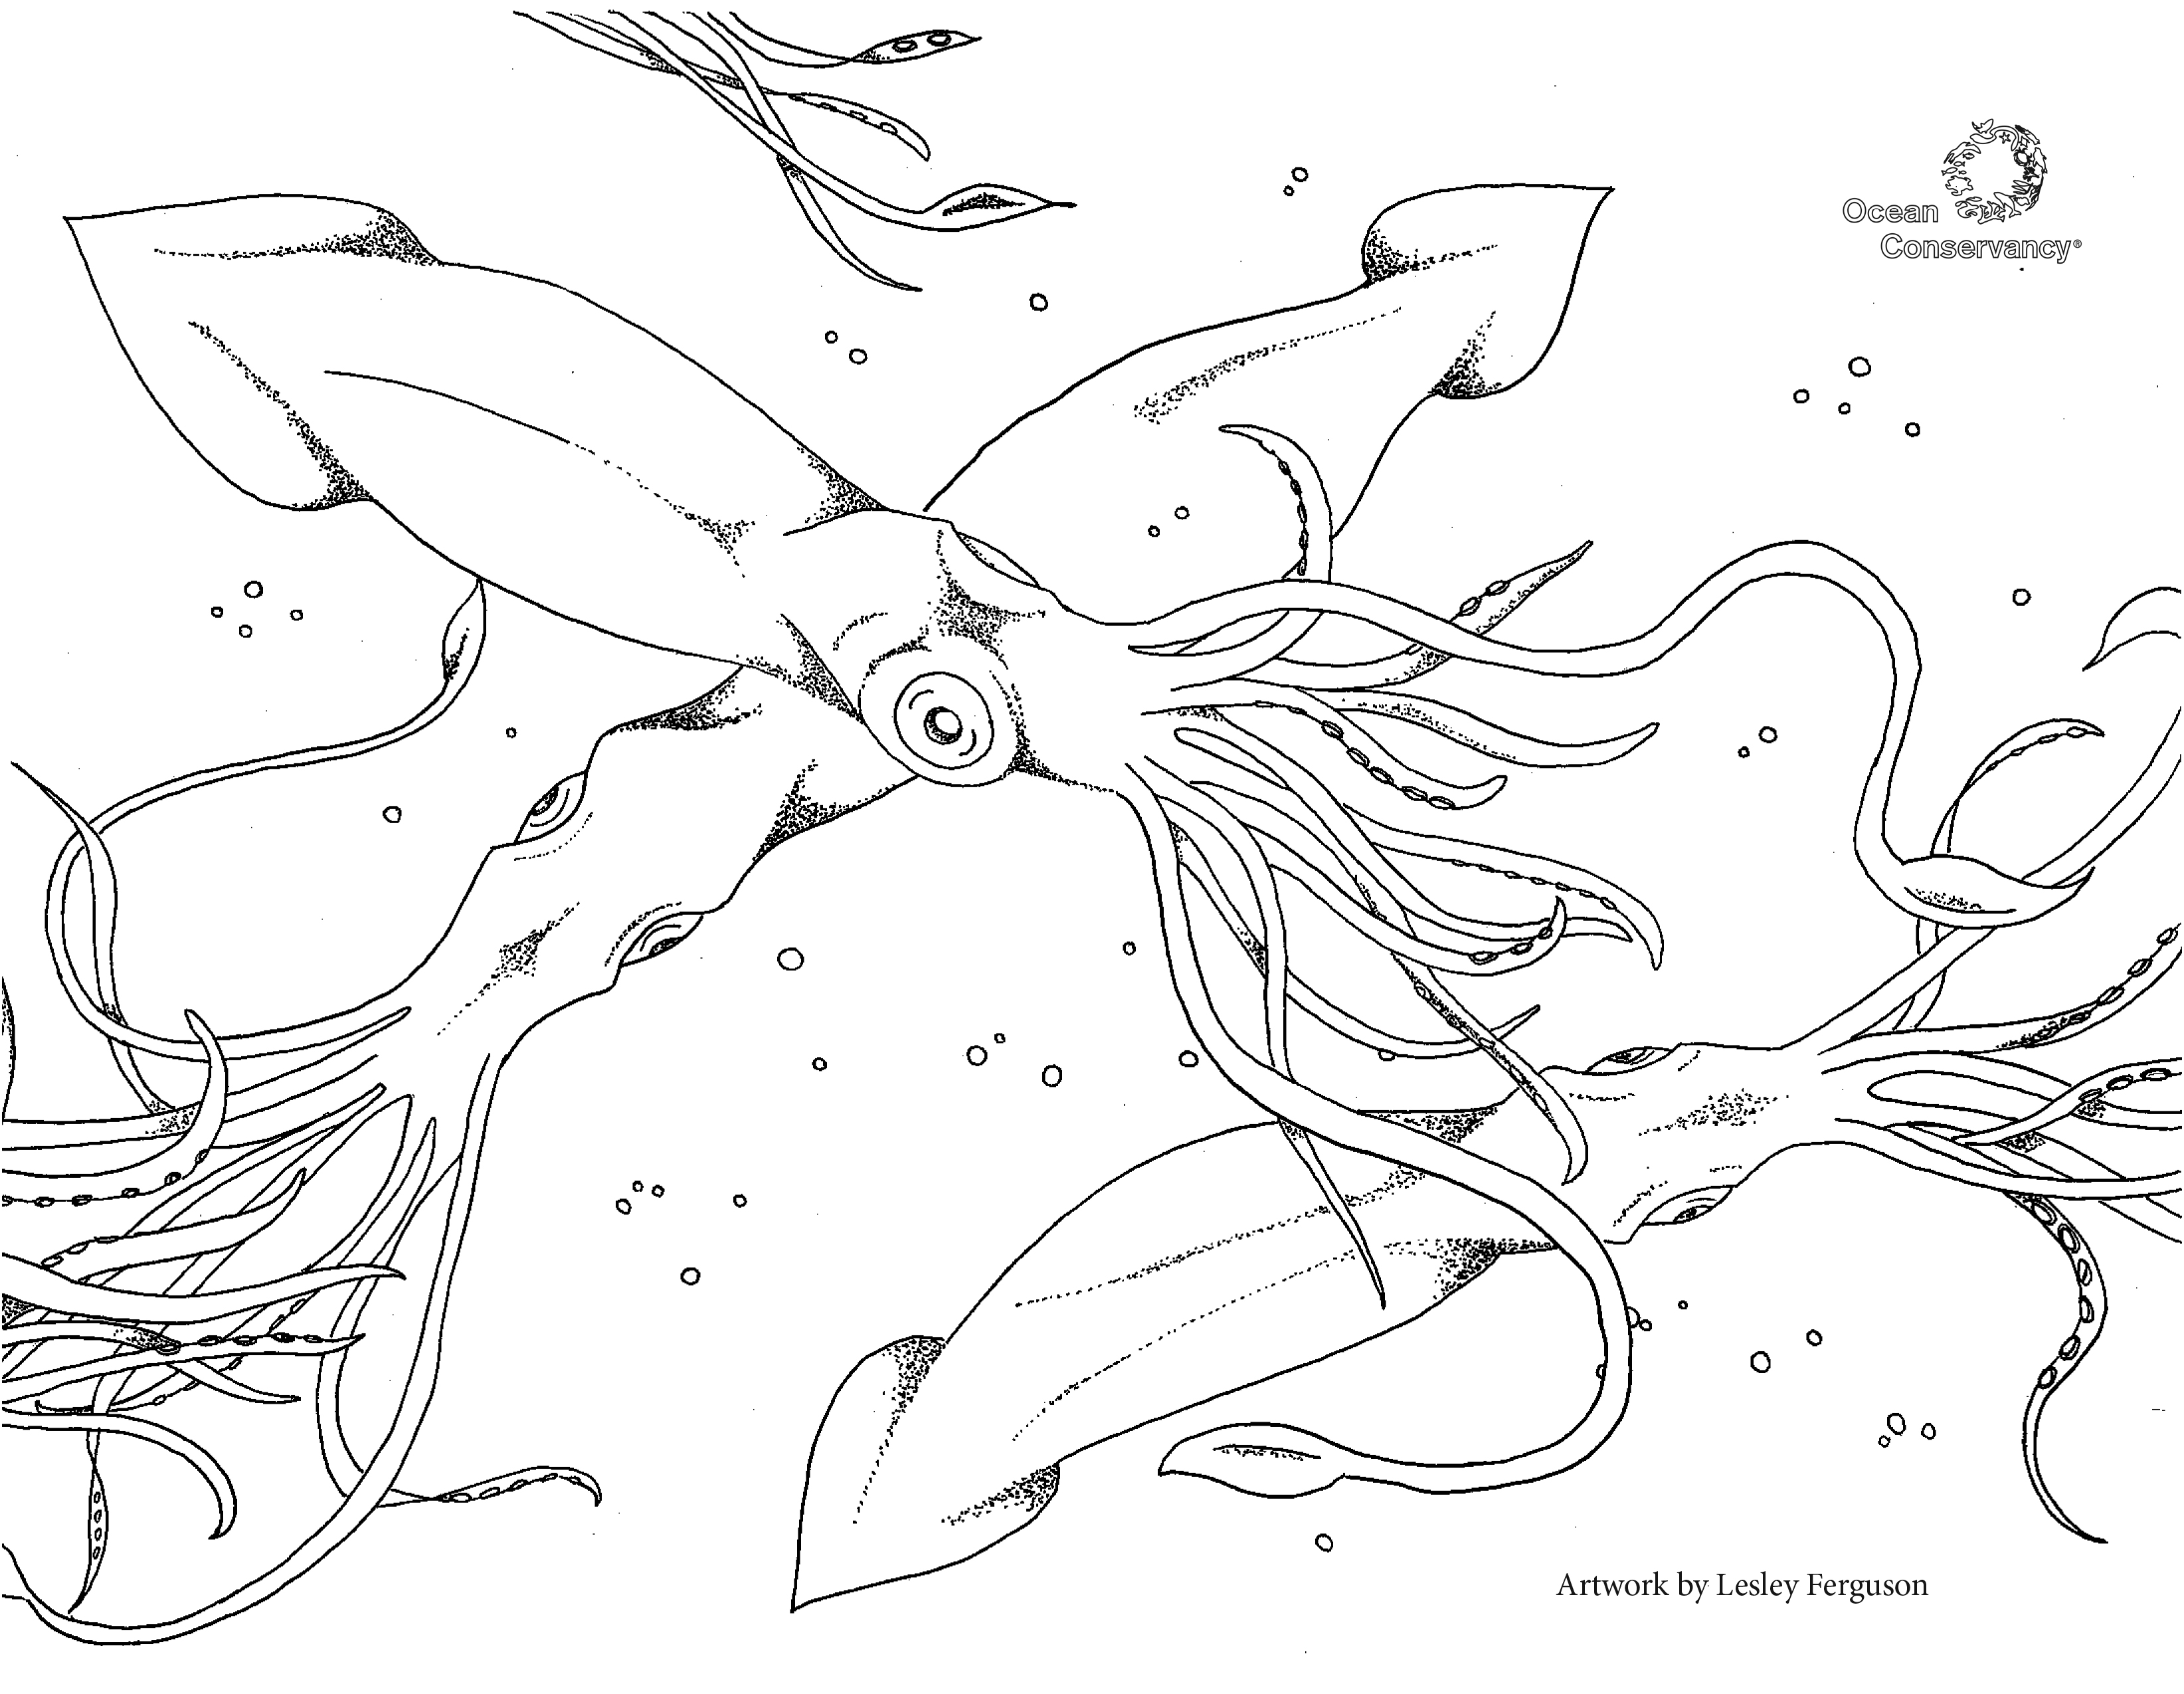 Sustainable Fisheries: Fish Coloring Pages - Ocean Conservancy